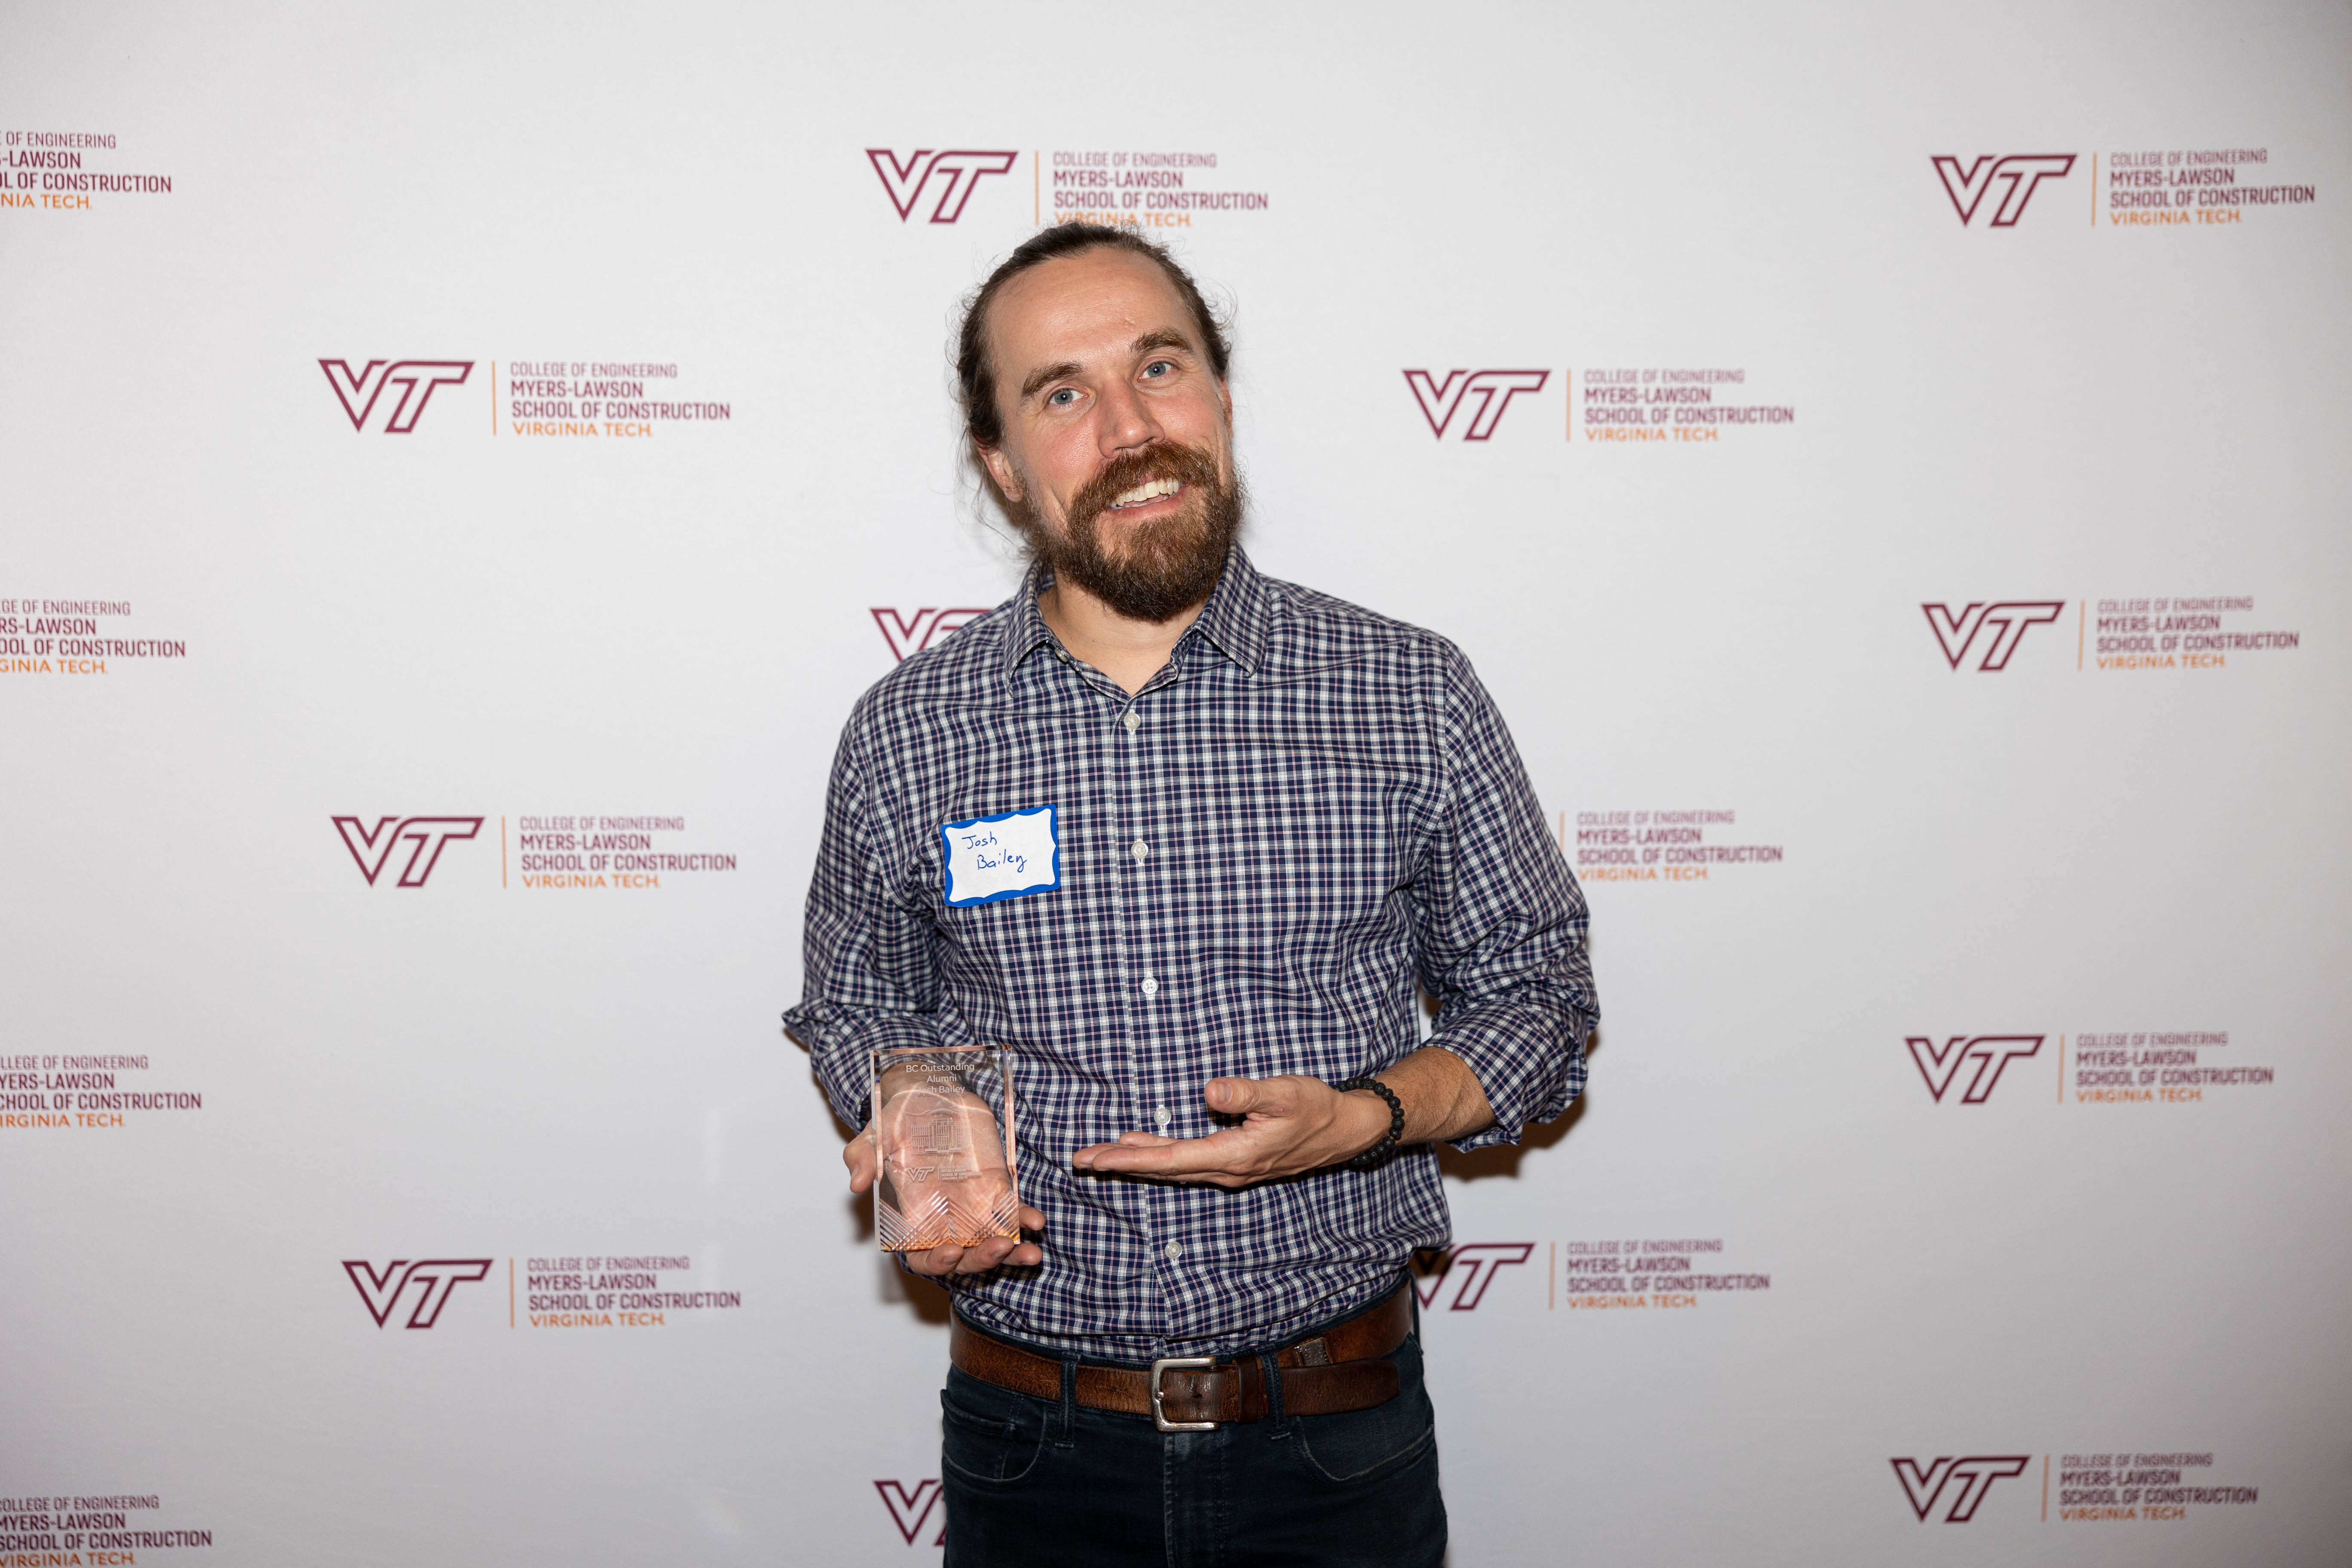 Joshua Bailey '09 with the Outstanding Building Construction Alumnus Award. Photo by Will Drew for Virginia Tech.